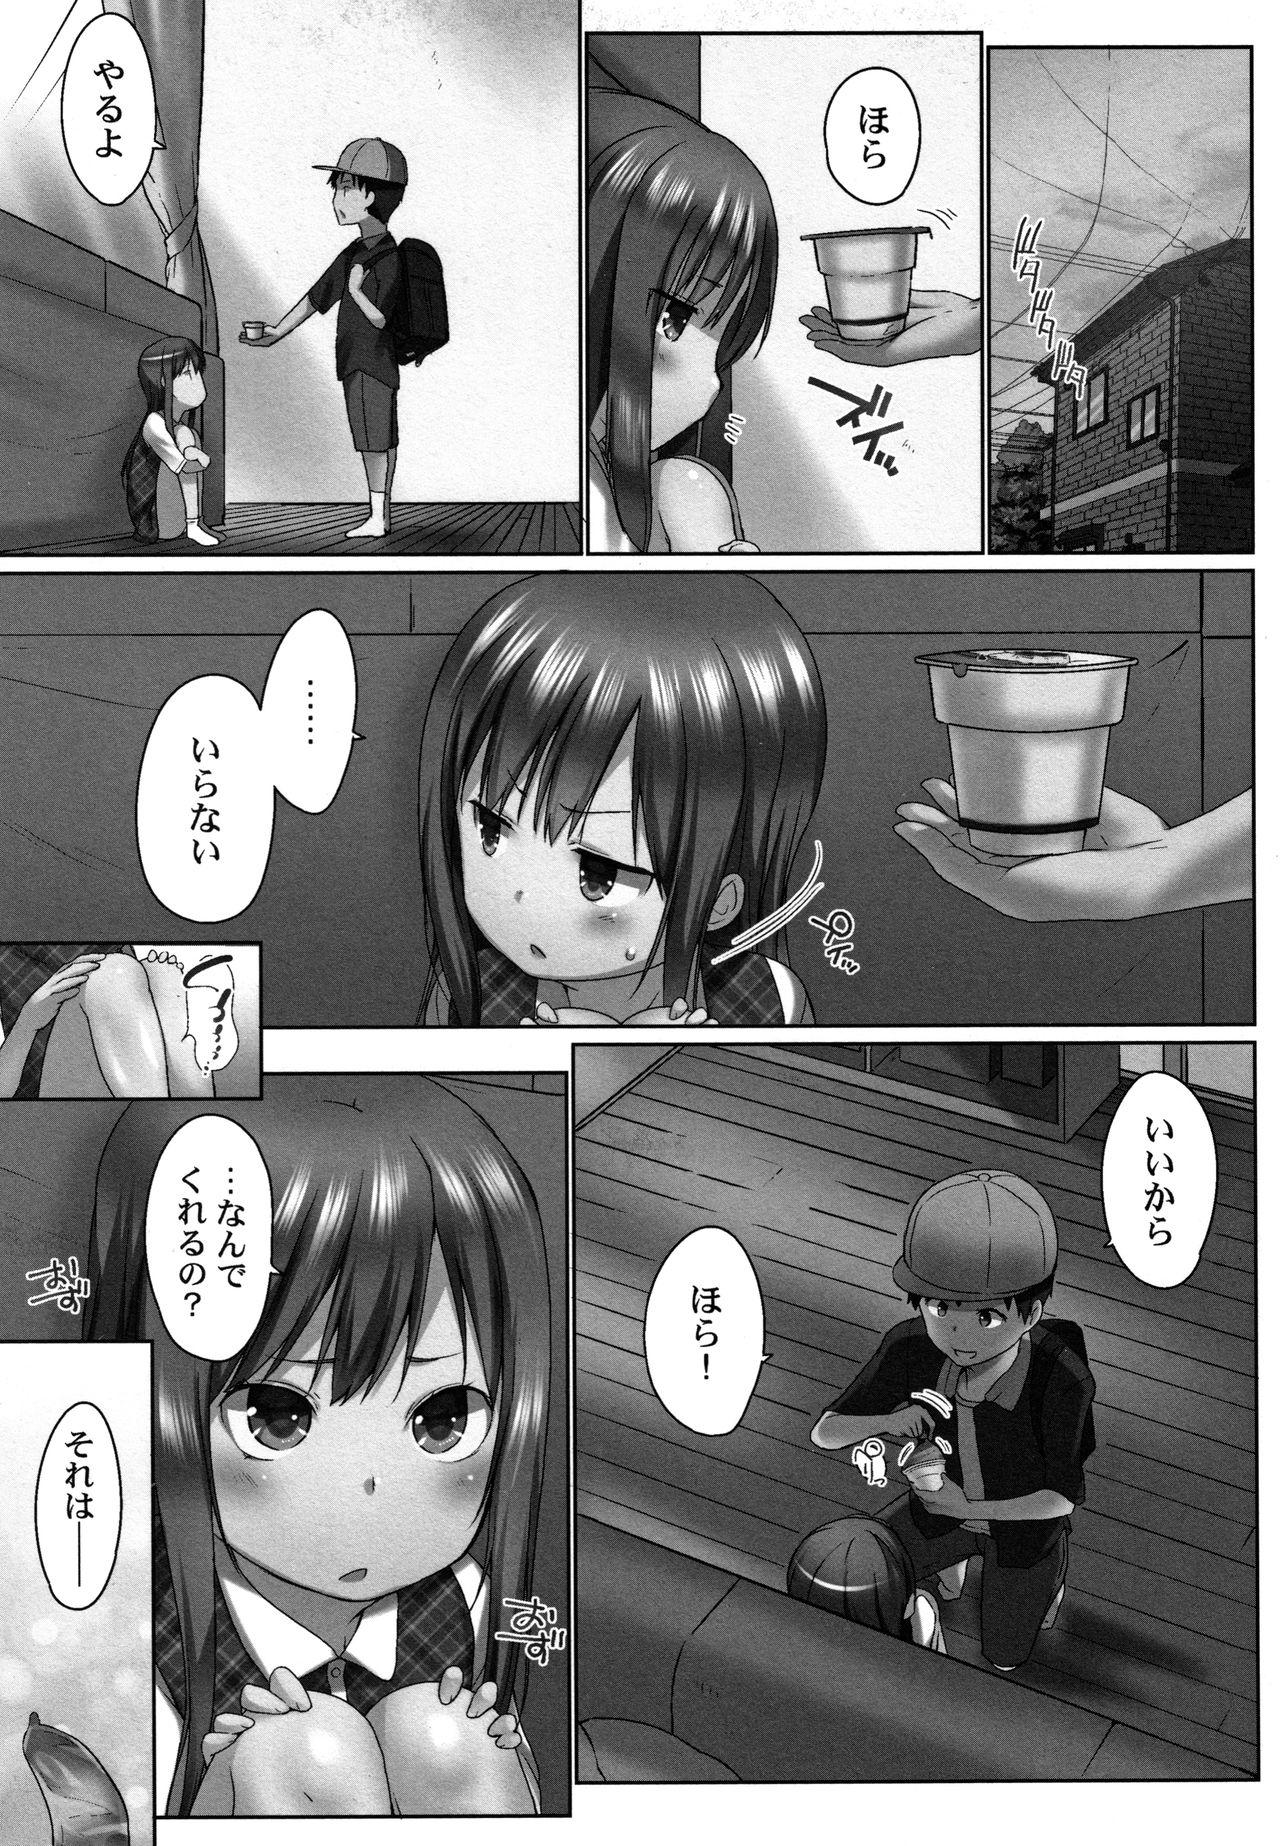 Overflow Page 10 Of 165 hentai comic, Overflow Page 10 Of 165 hentai doujin...